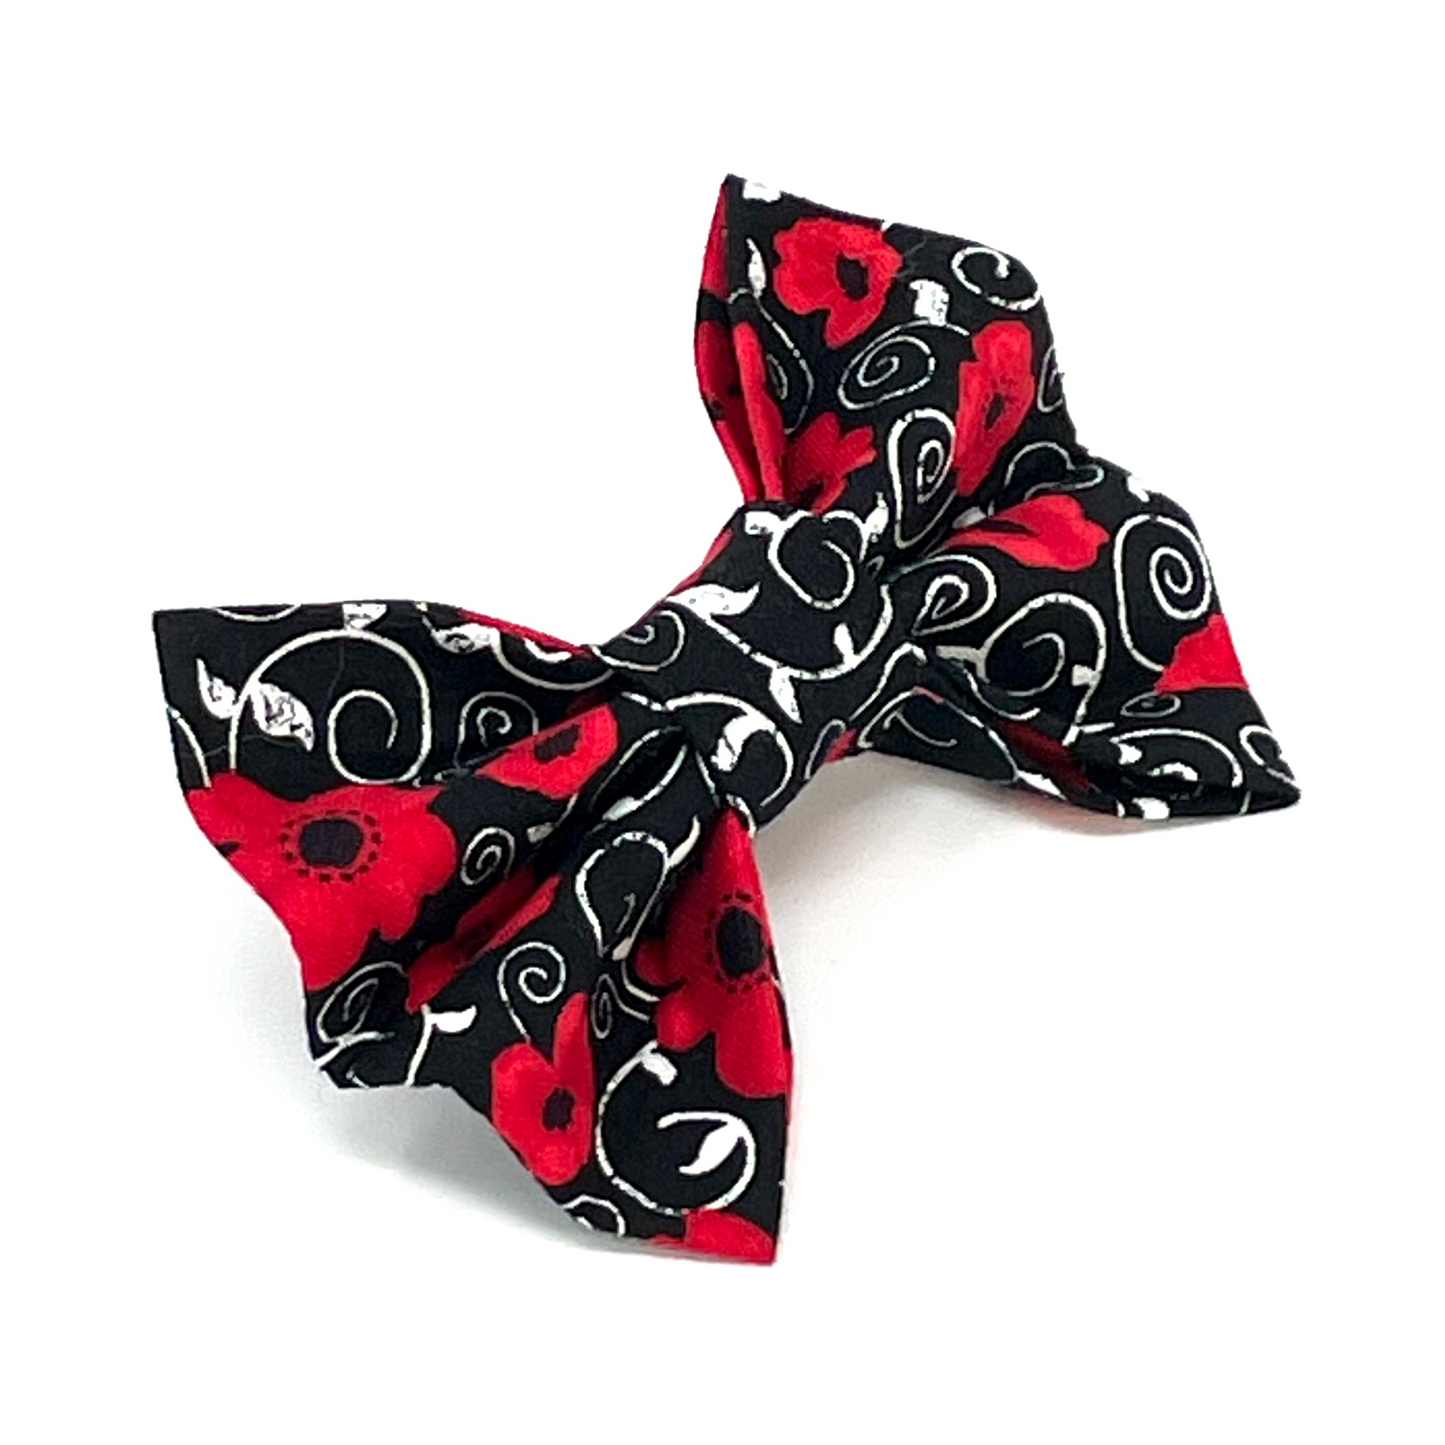 Passiondale Poppy Dog Bow